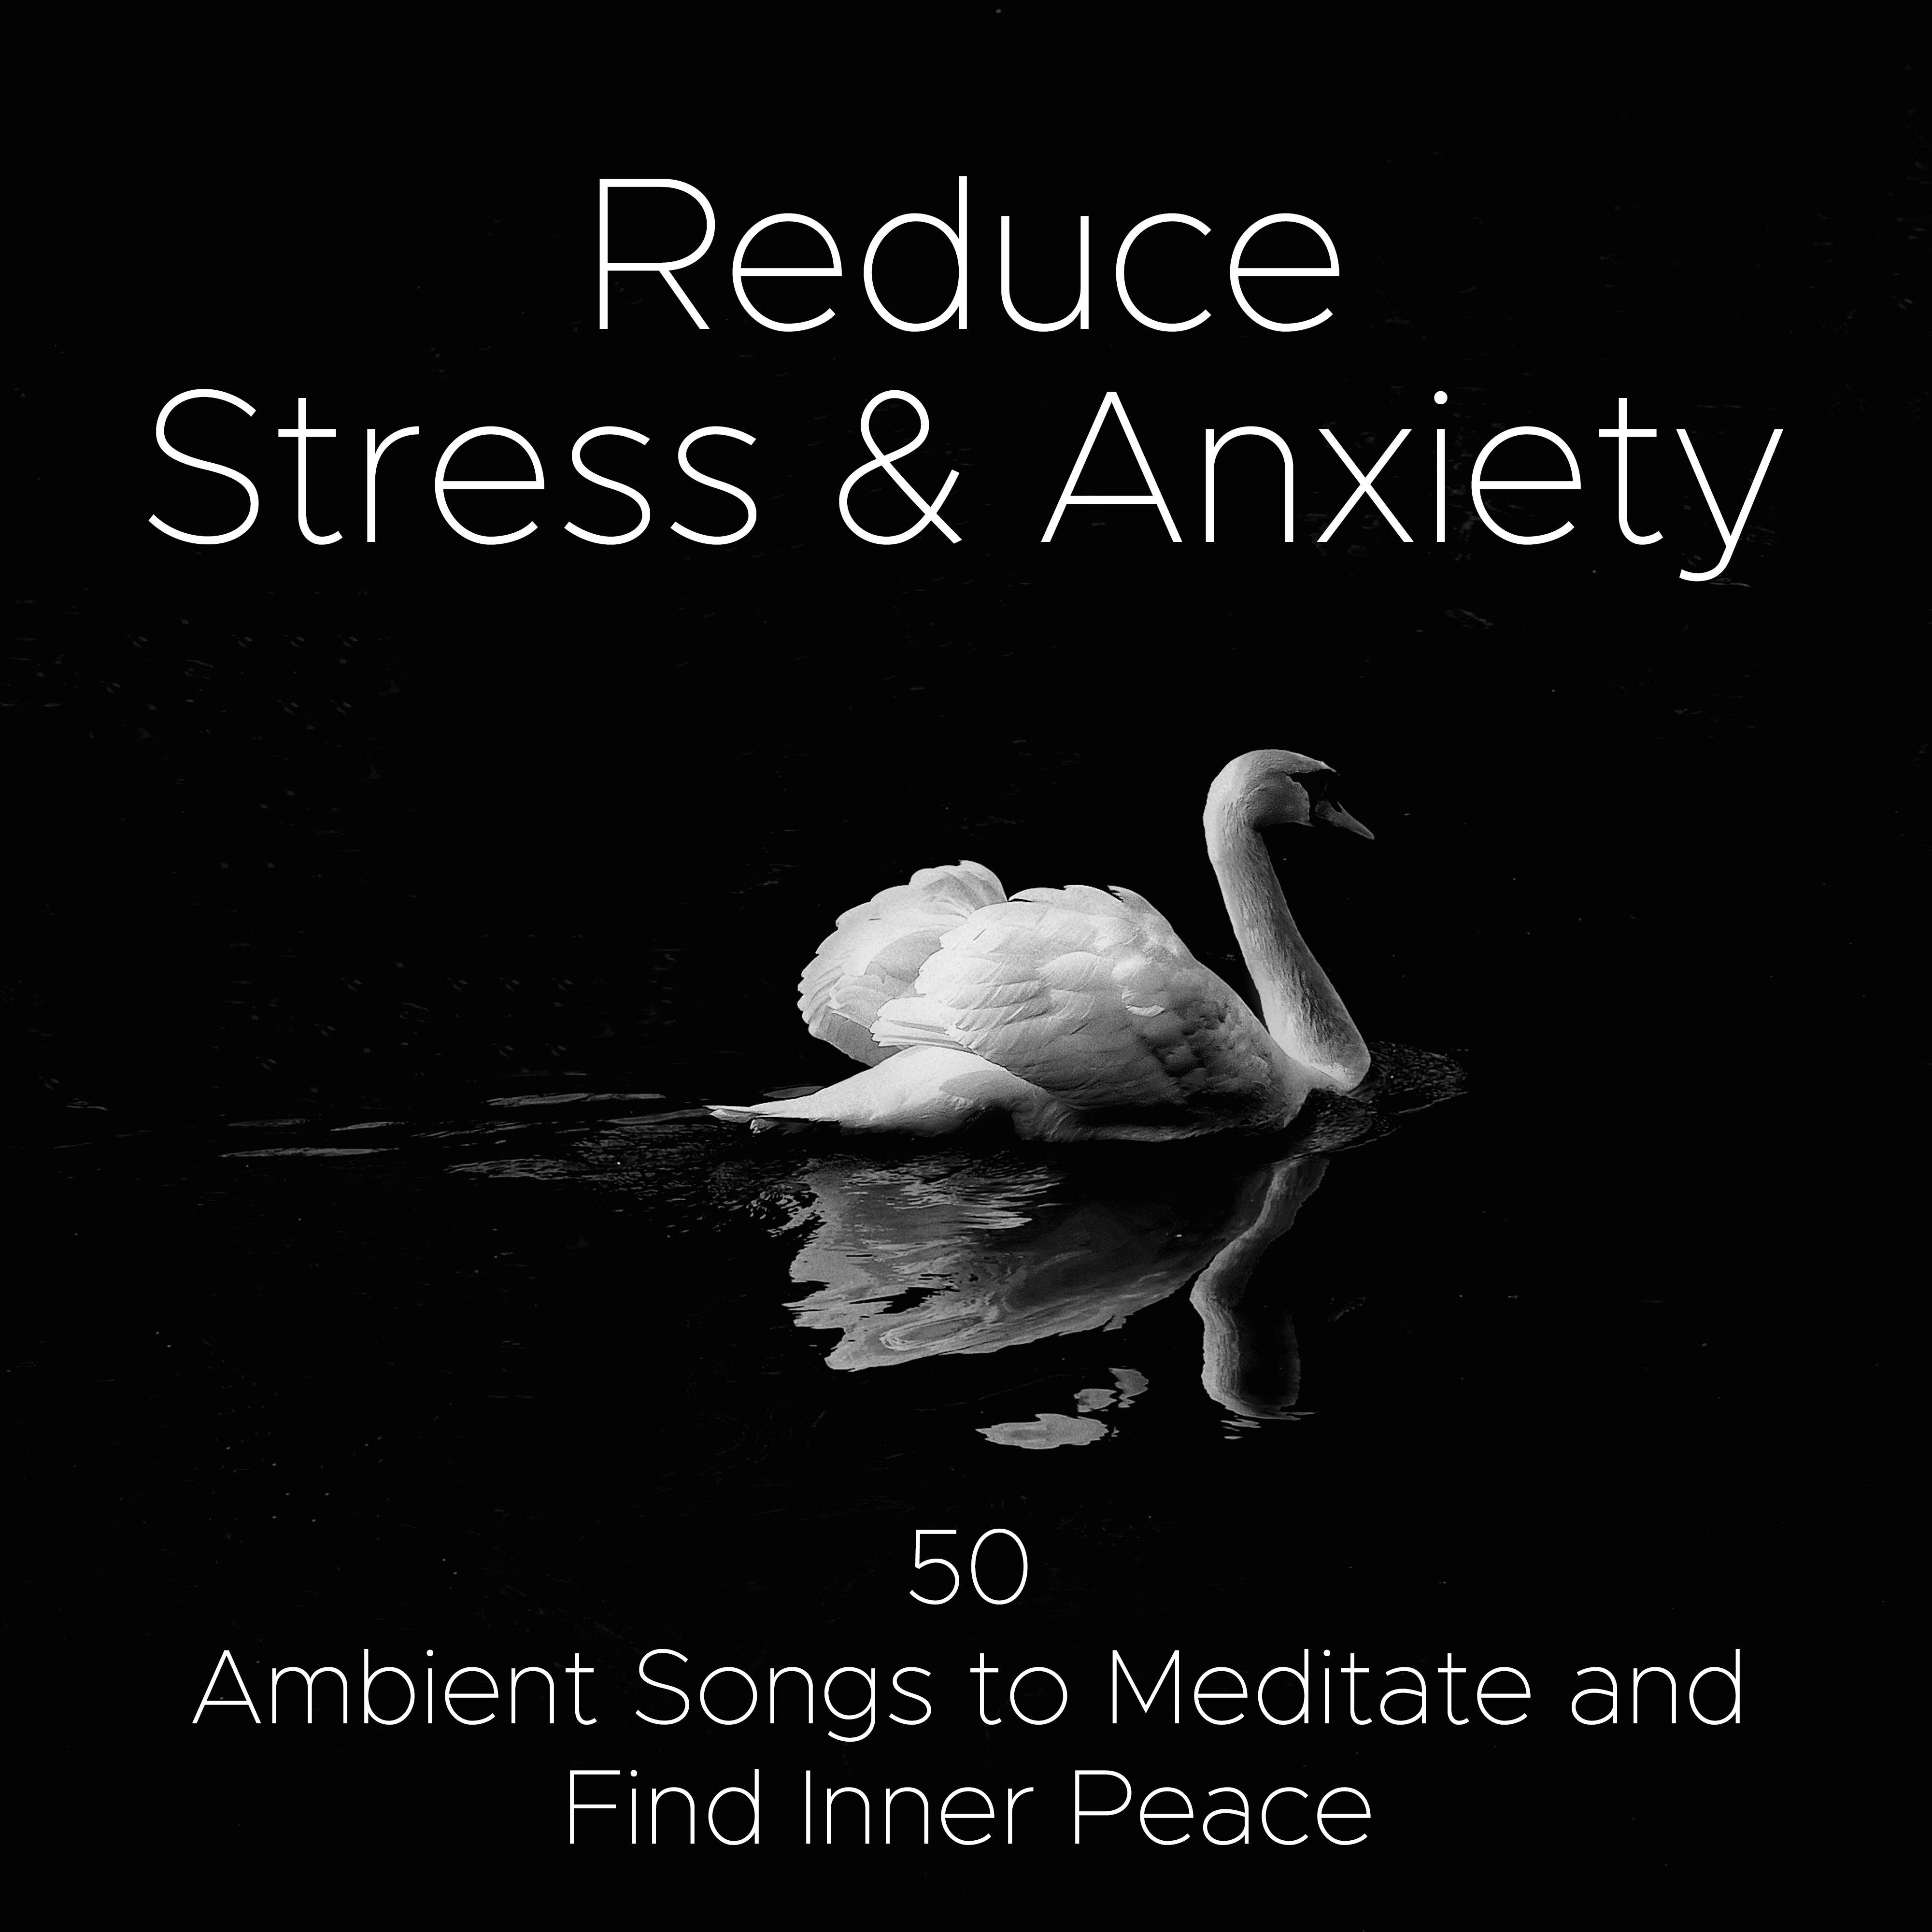 Reduce Stress & Anxiety - 50 Ambient Songs to Meditate and Find Inner Peace